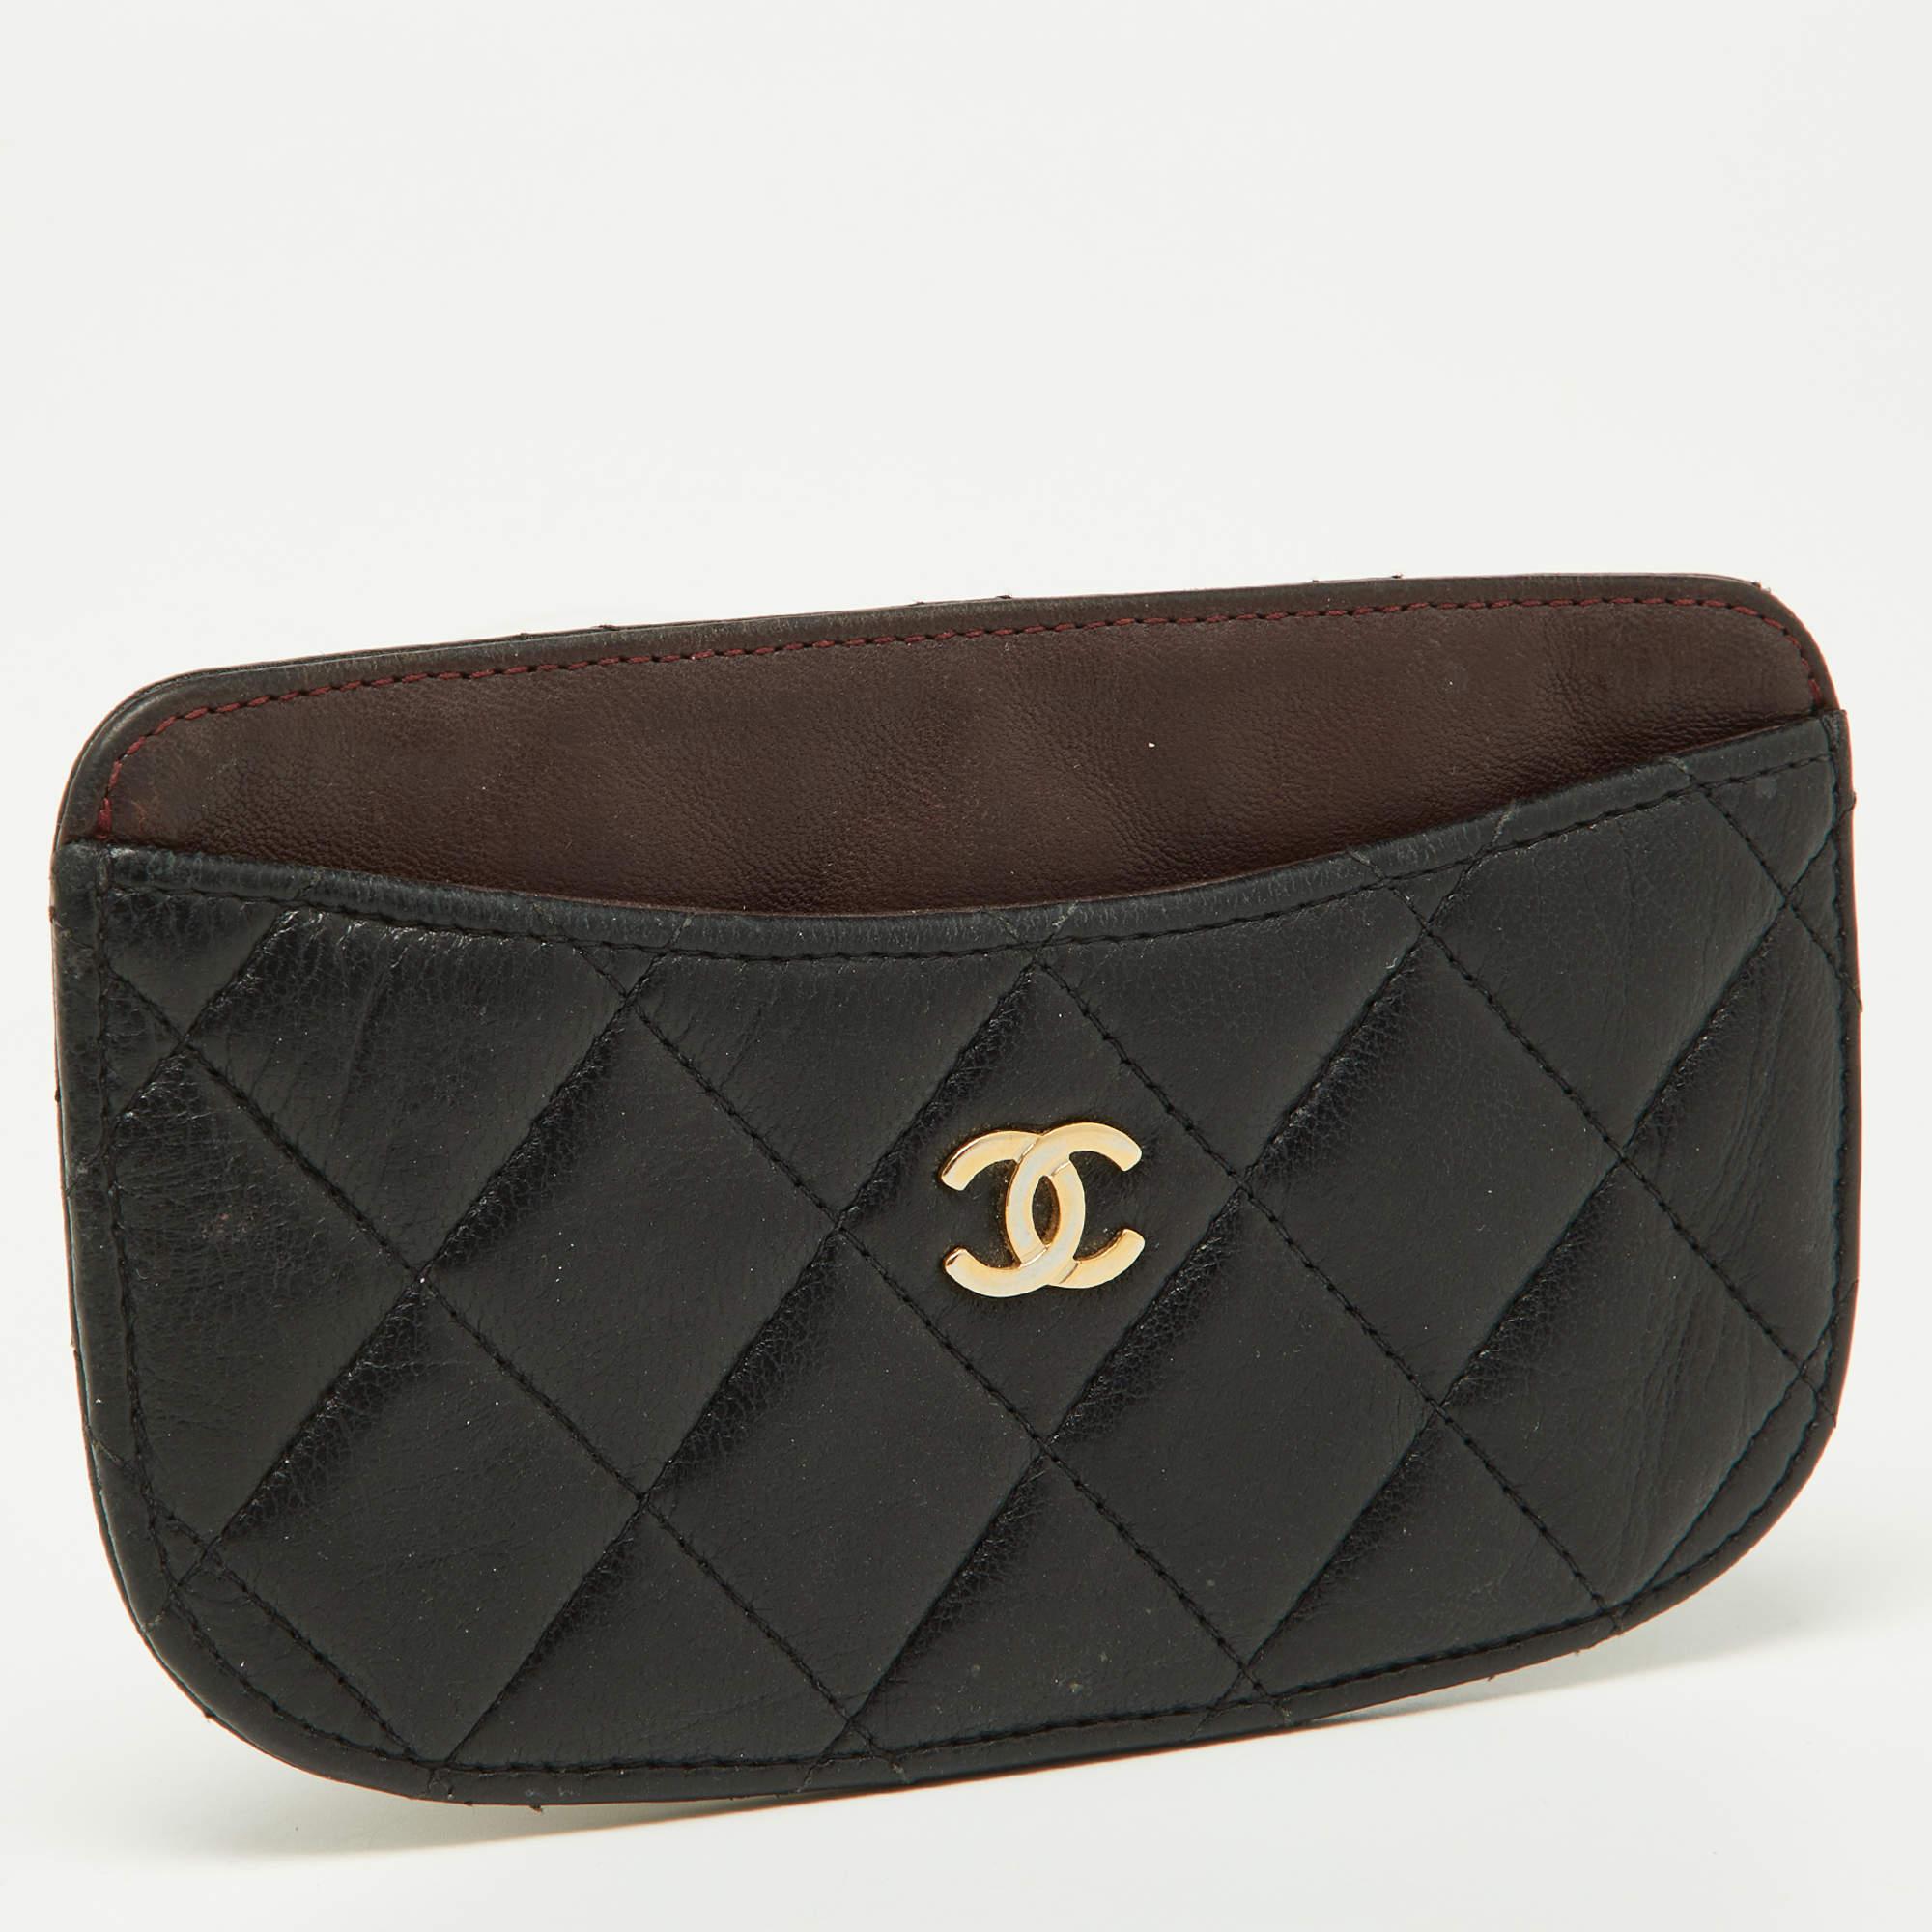 Carry your credit cards in style with this Chanel leather card holder. It features a quilted exterior with dual slip pockets in the front and back, a central slip pocket and CC logo in silver-tone.

